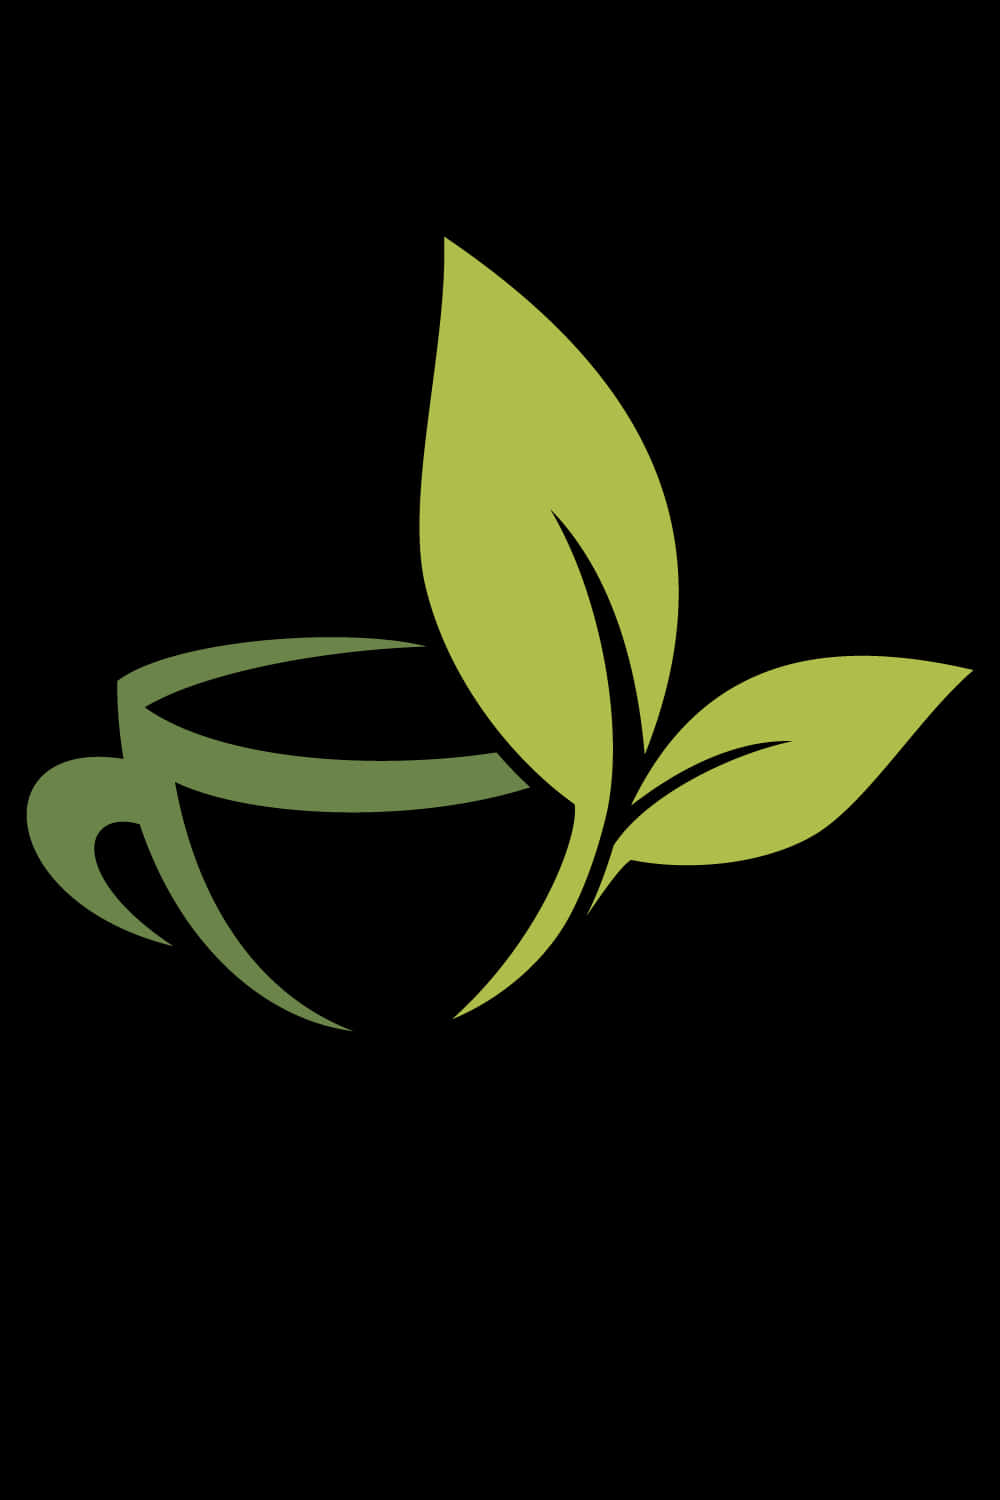 A Logo Of A Cup With Leaves